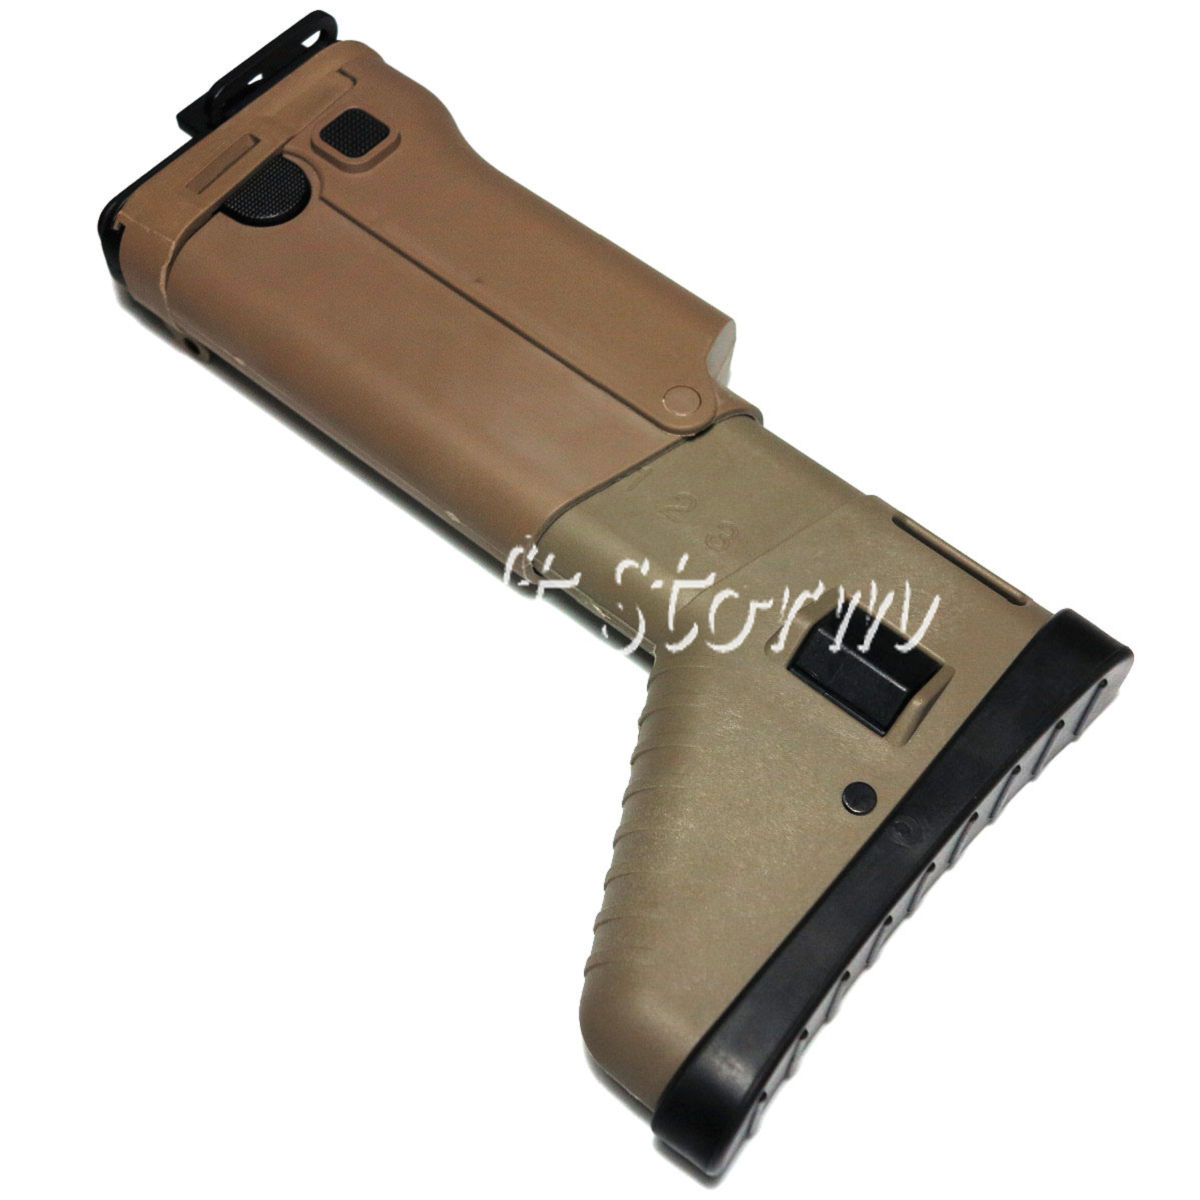 Airsoft Tactical Gear D-Boys Side Folding Retractable Stock for SCAR AEG Tan